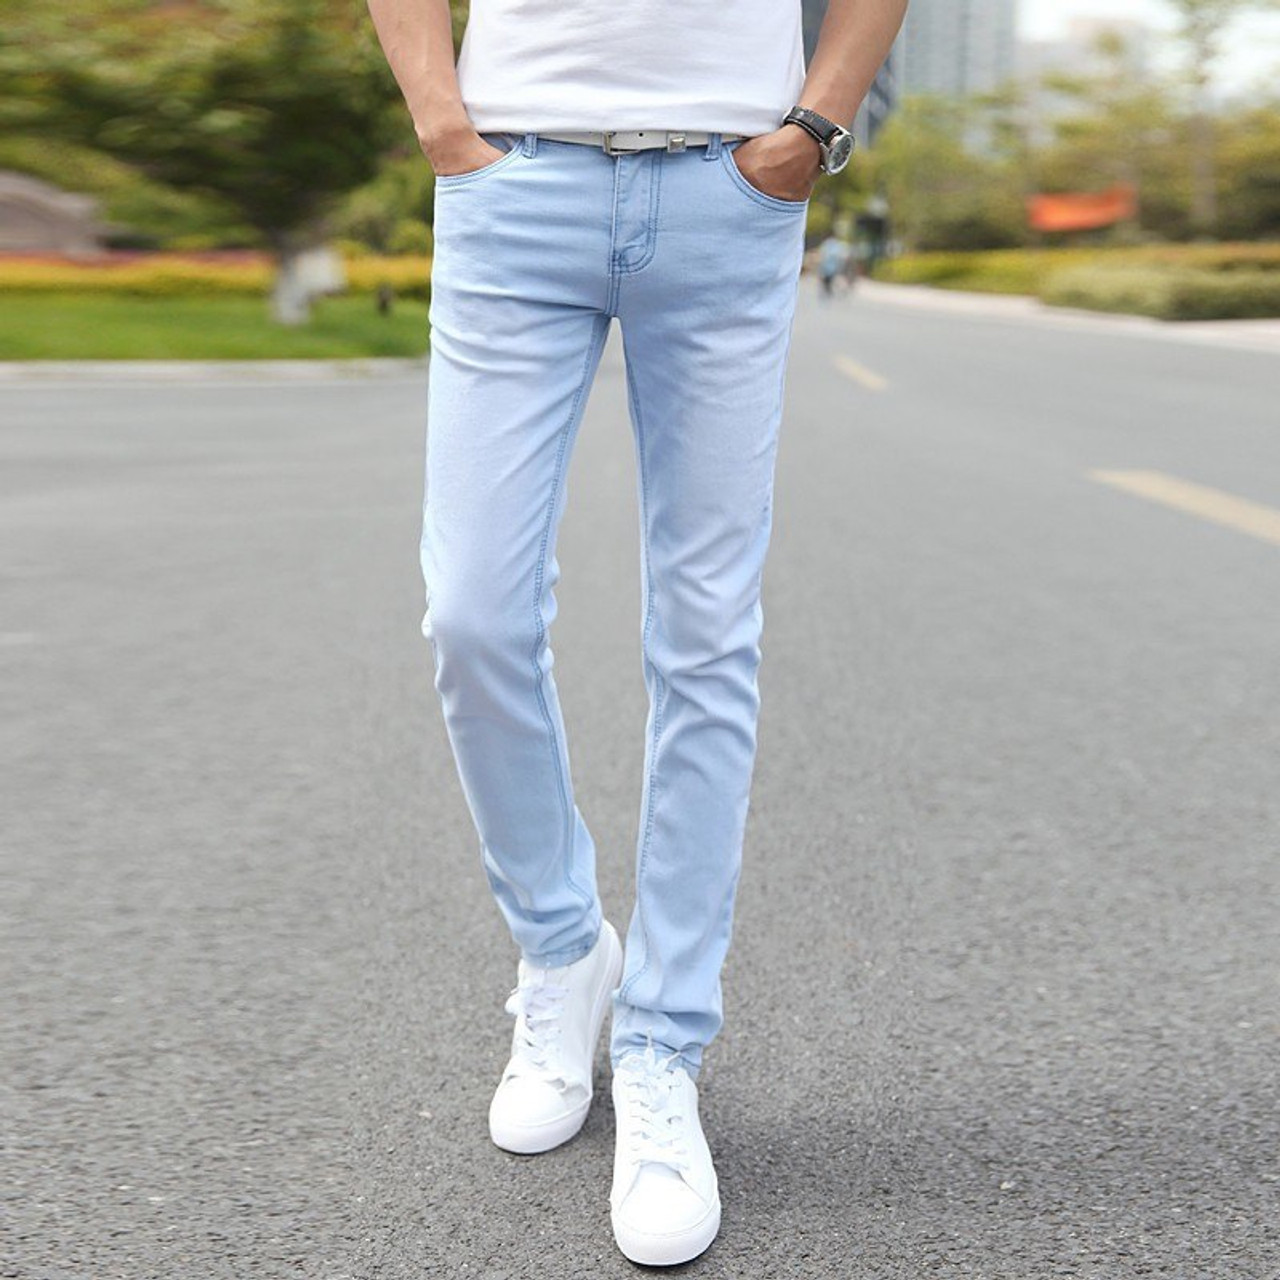 Top more than 83 blue jeans trousers latest - in.starkid.edu.vn